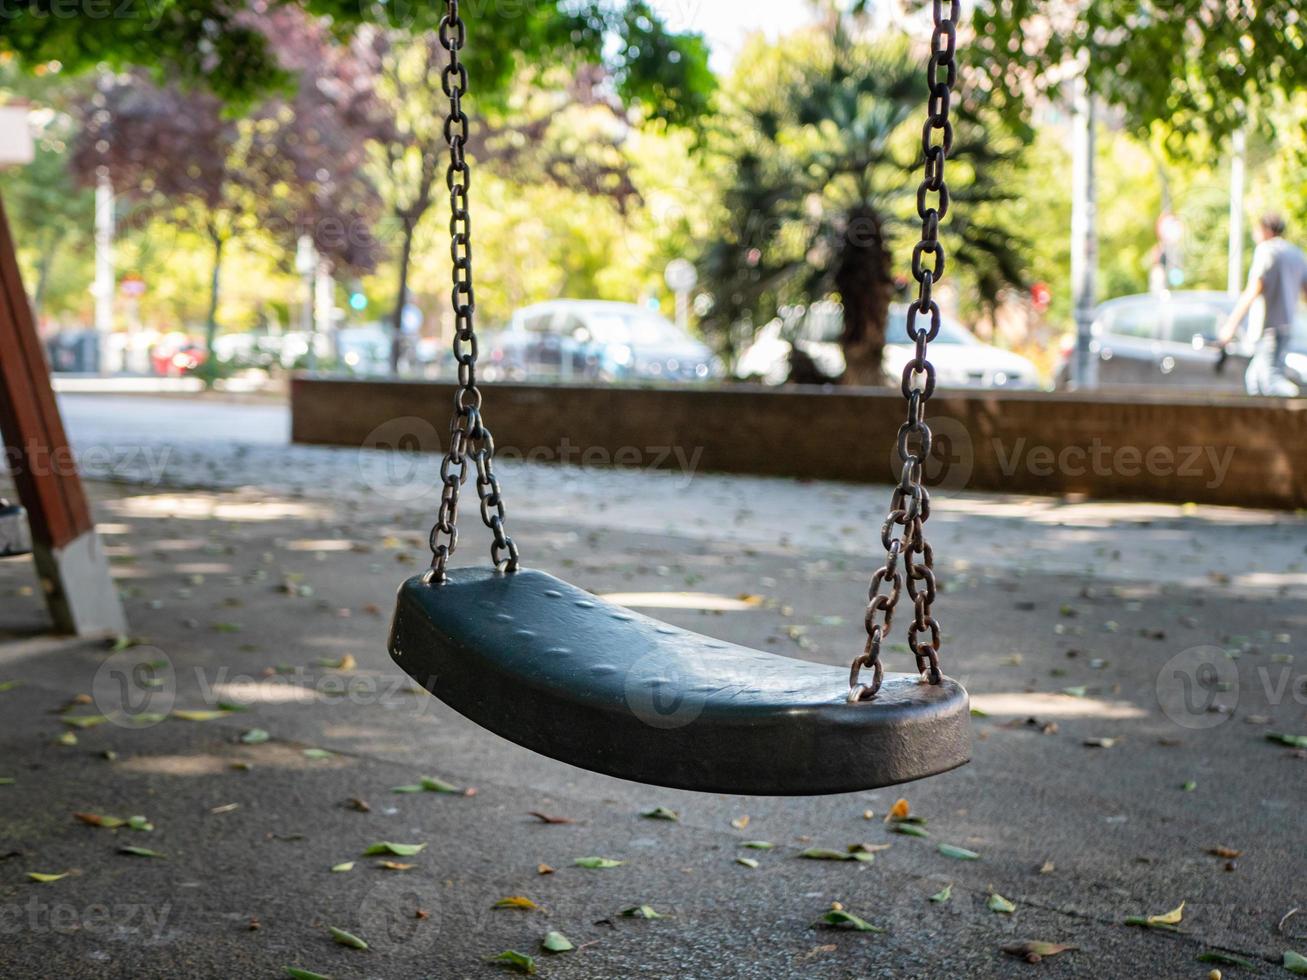 Photo of an empty swing seat hanging on chains on the playground